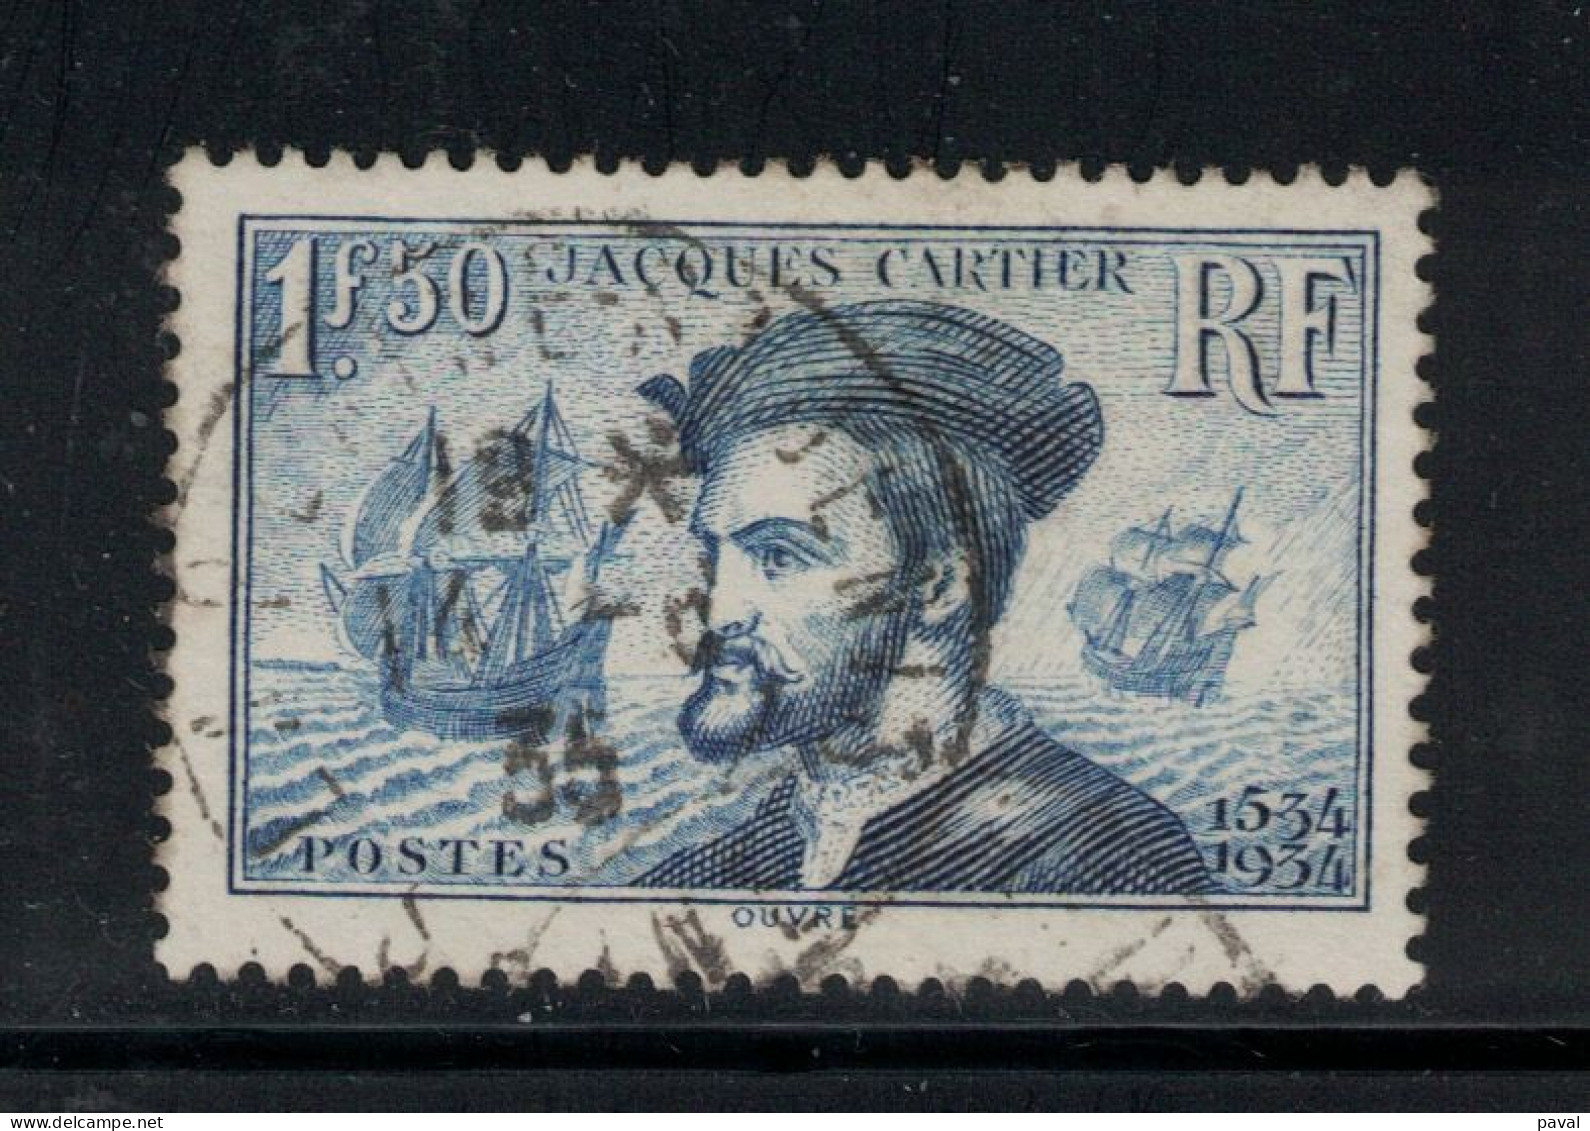 N°297 OBLITERE, FRANCE.1934, JACQUES CARTIER - Used Stamps